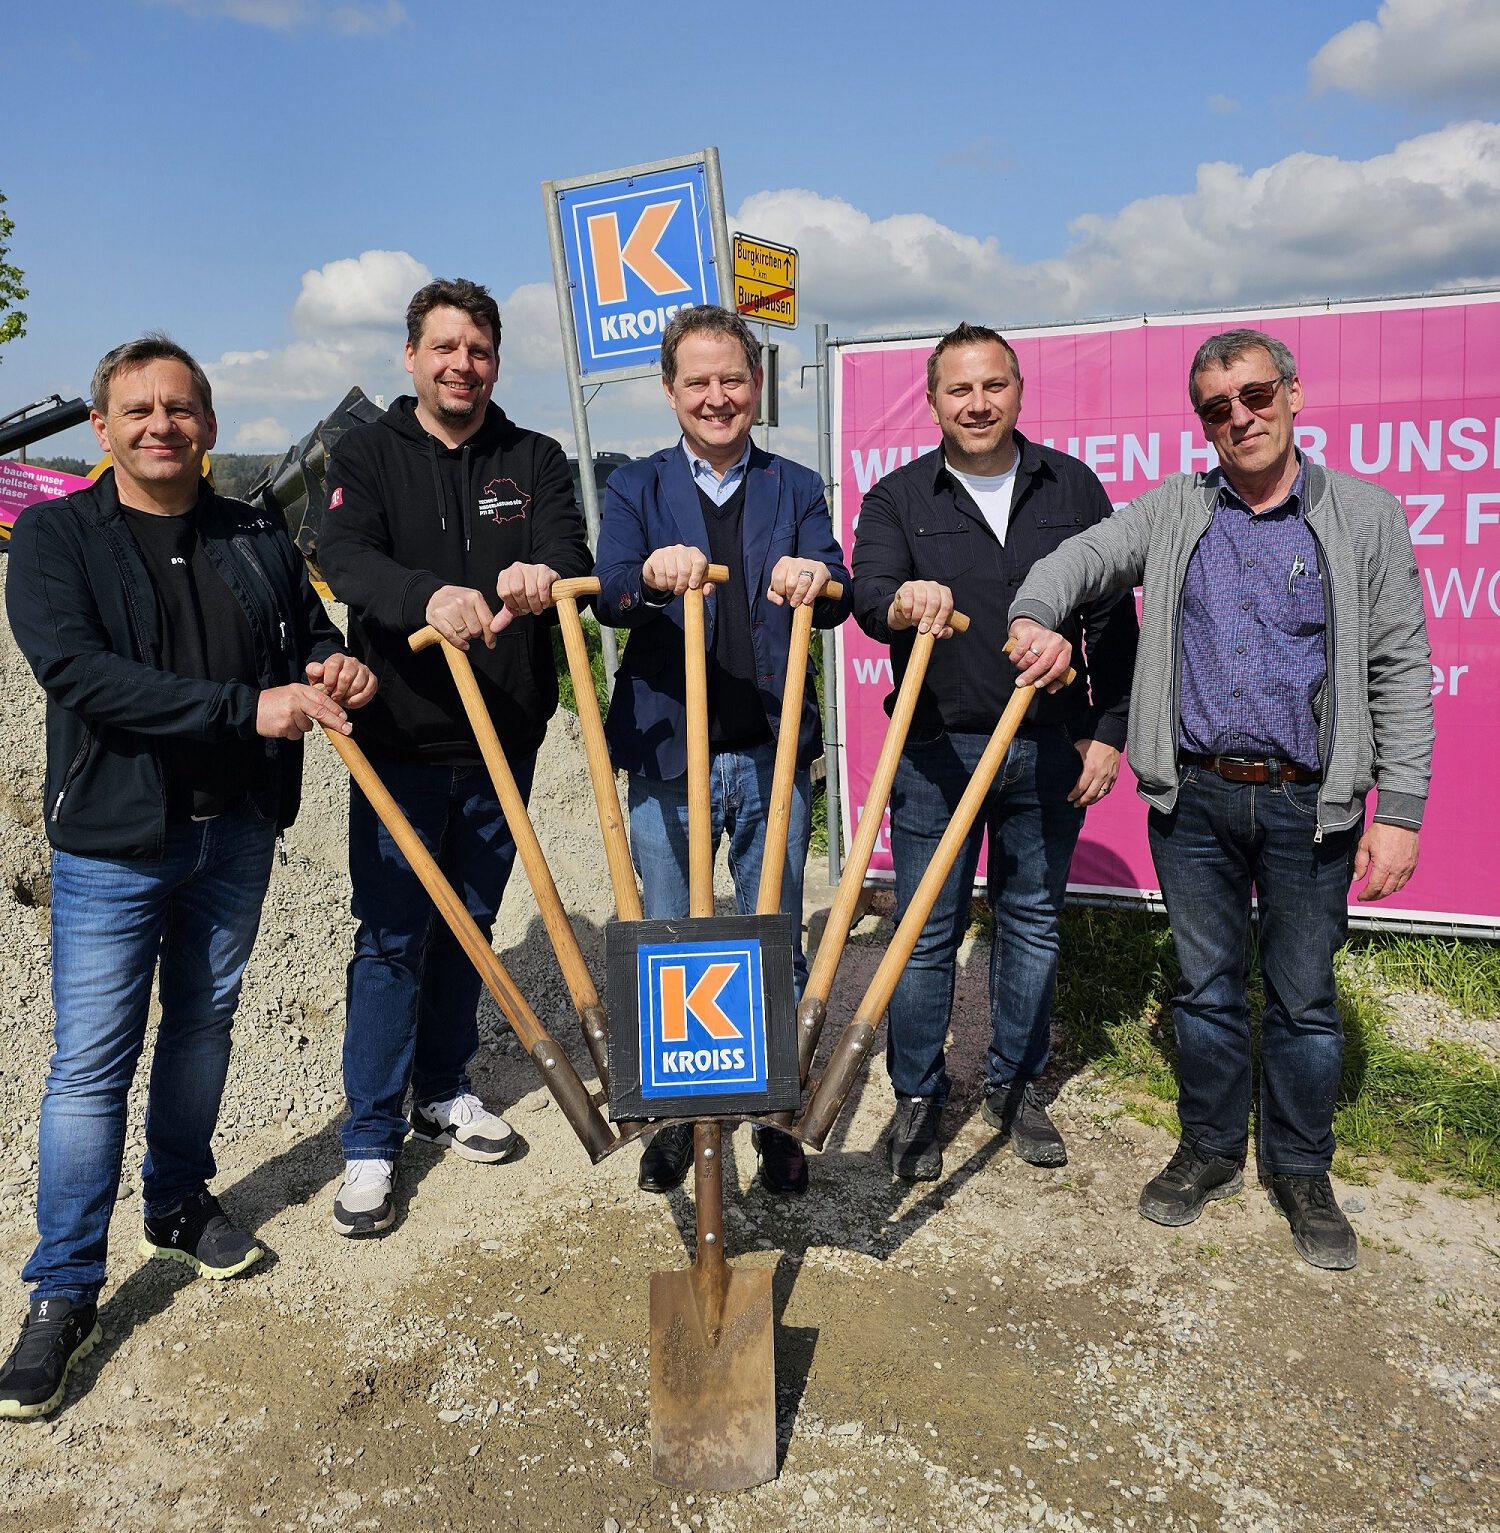 Groundbreaking ceremony for the final construction work for the broadband expansion: Hans Grünzinger, construction supervisor for the broadband expansion in Burghausen, Michael Neumeier, responsible team leader for the broadband expansion at Deutsche Telekom, First Mayor Florian Schneider, Alexander Brunner, local construction manager, and Wilhelm Ochsenbauer, construction manager © Stadt Burghausen/ebh